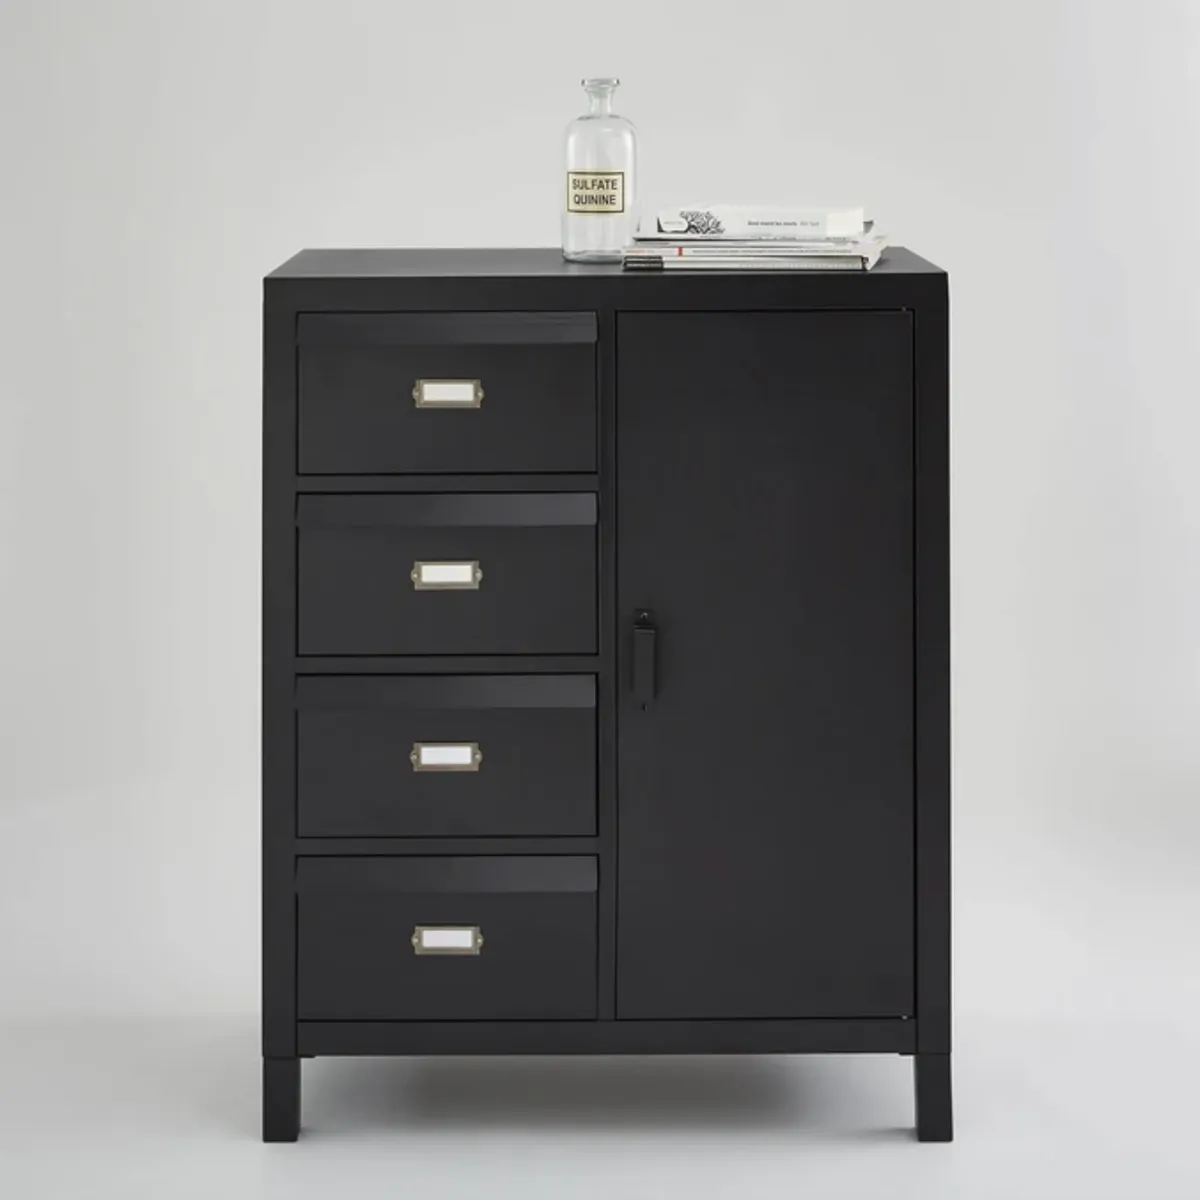 Hiba Cabinet with Cupboard and 4 Labelled Drawers, £246.50, La Redoute